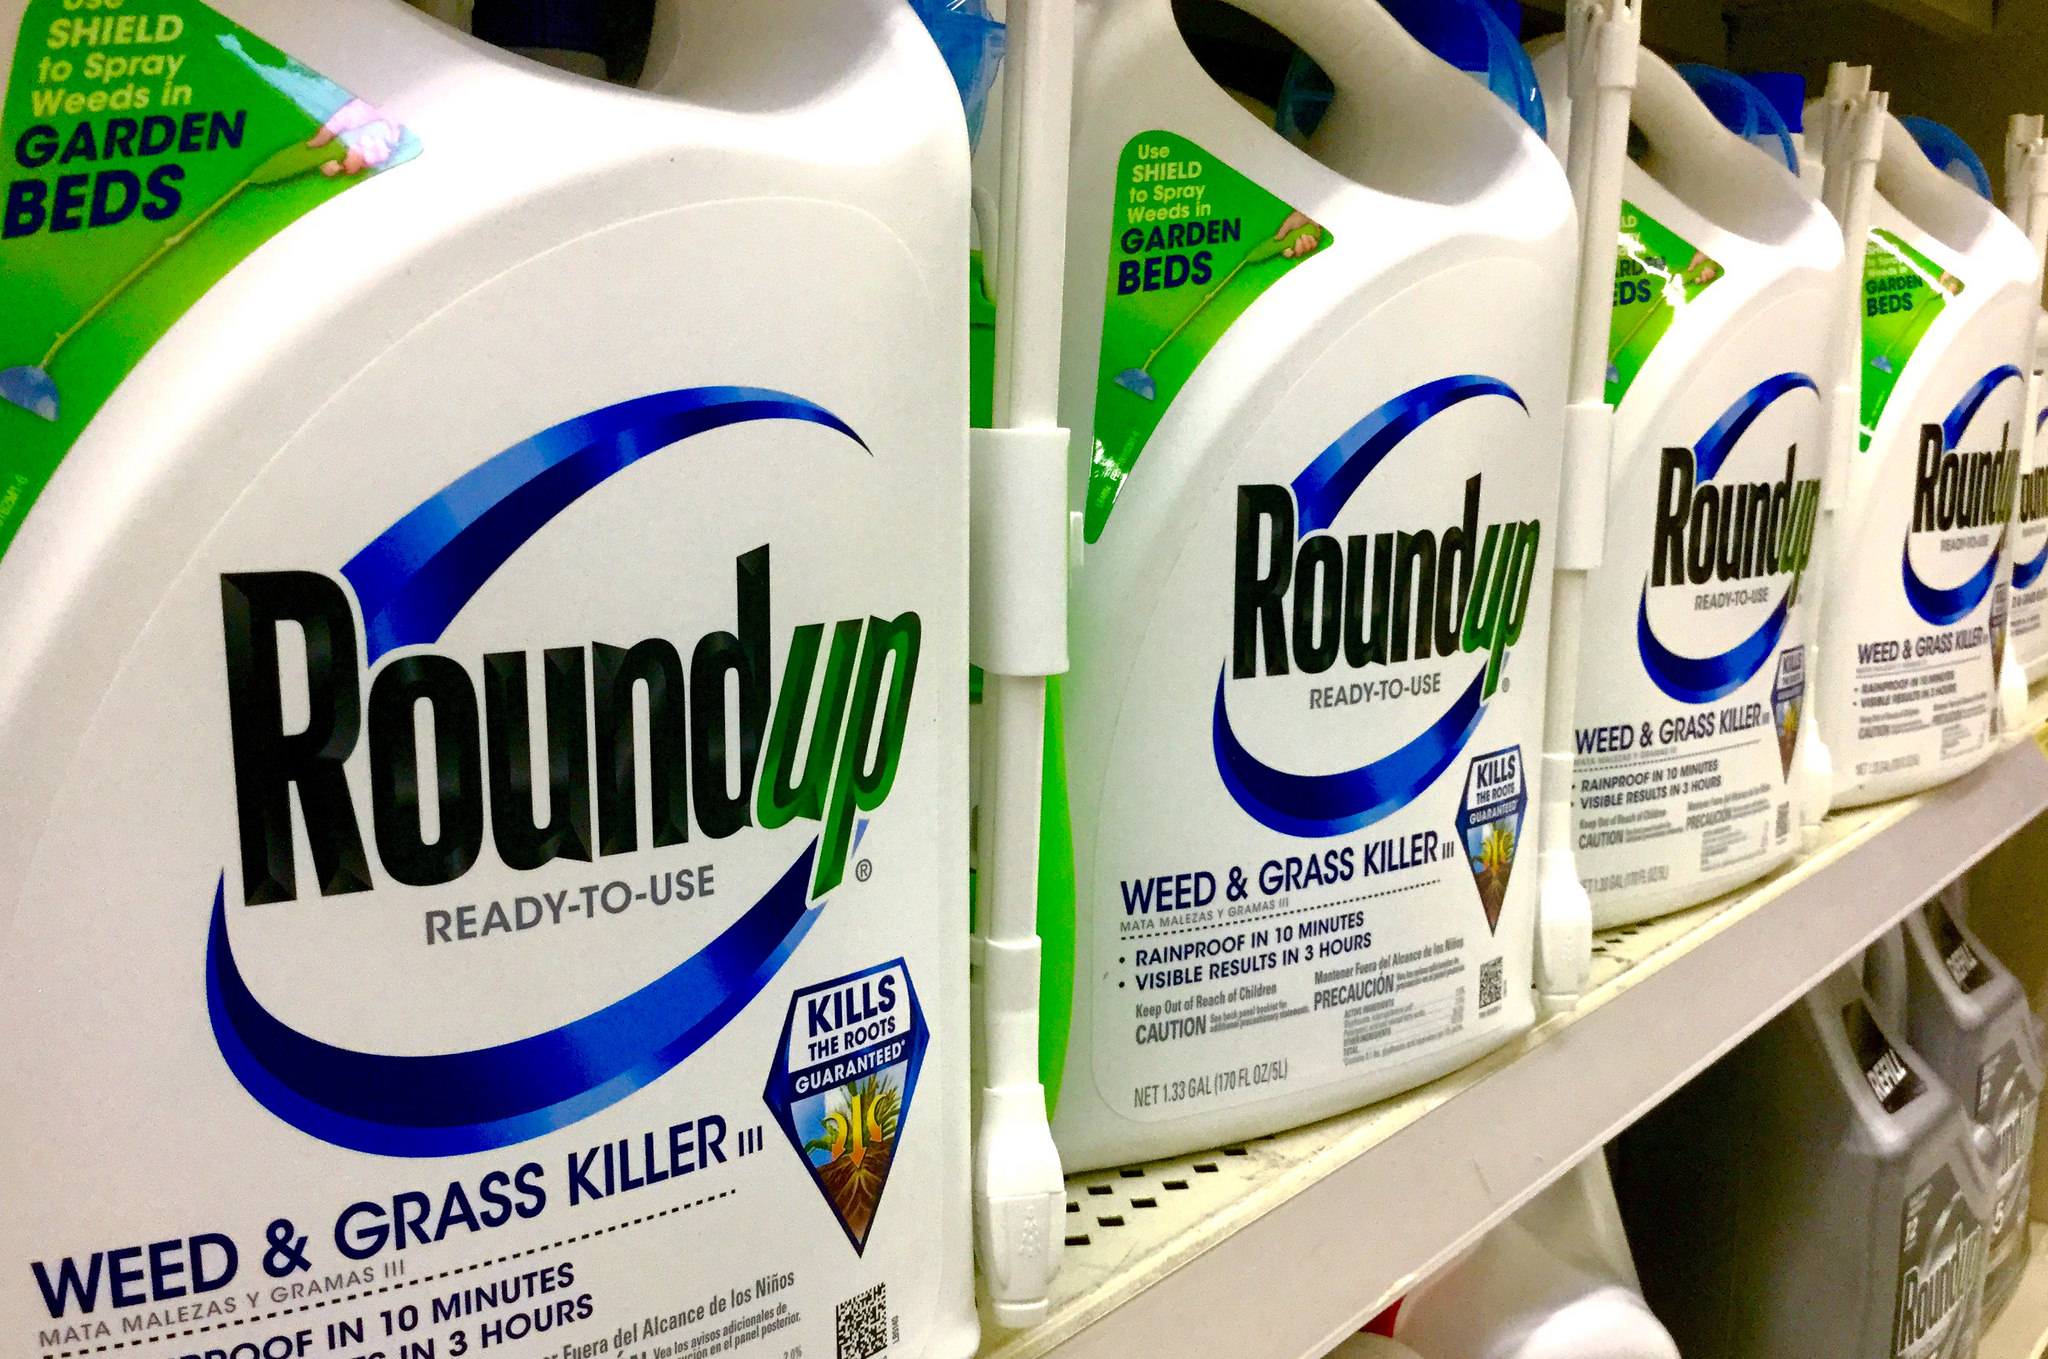 <i>Roundup by <a href='https://www.flickr.com/photos/jeepersmedia/'>Mike Mozart</a> on <a href='https://www.flickr.com/photos/jeepersmedia/26133876014'>flickr</a></i>